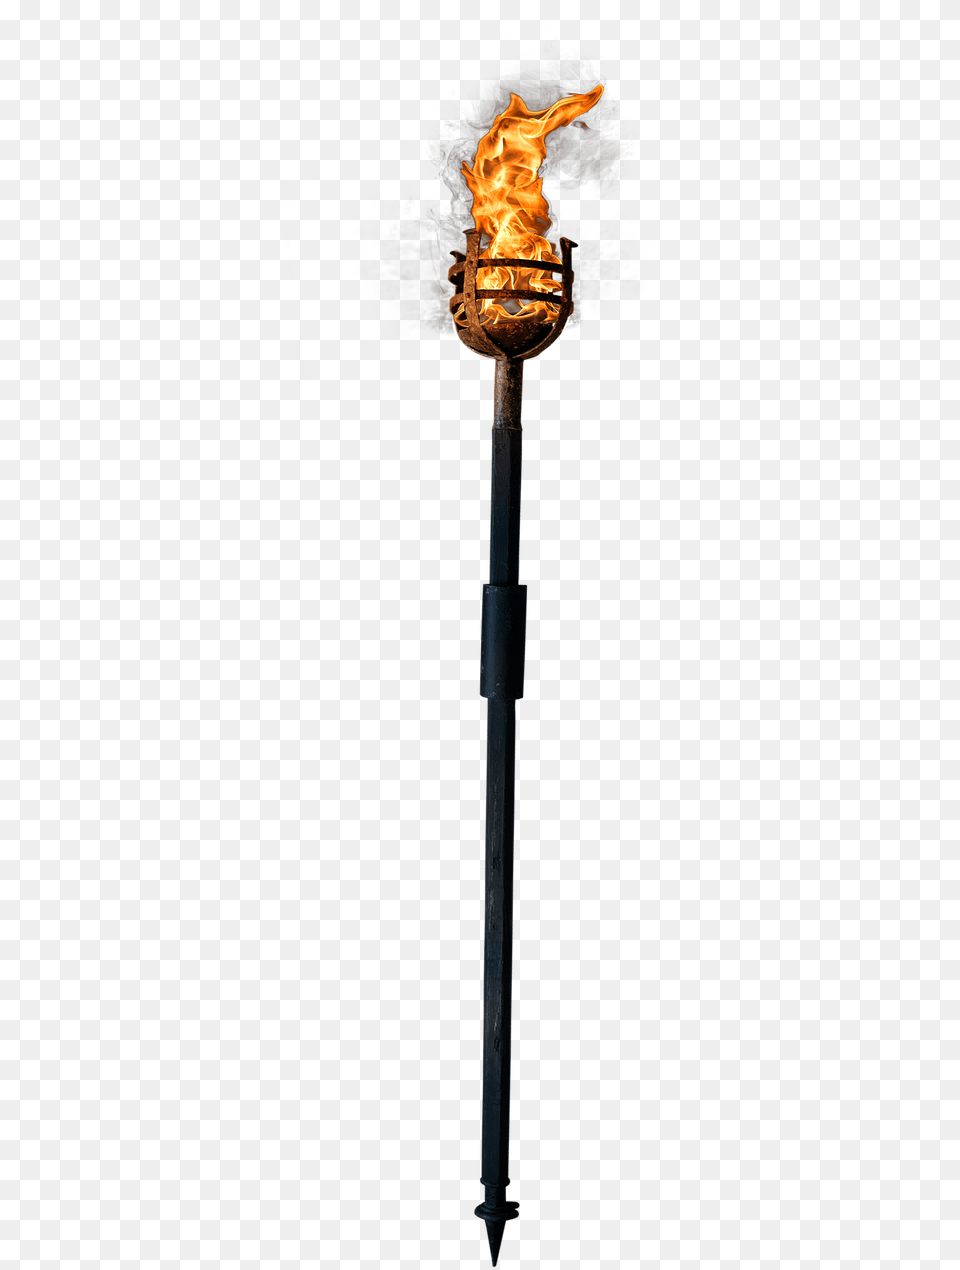 Torch Fire Flame Image On Pixabay Rifle, Light, Mace Club, Weapon Png